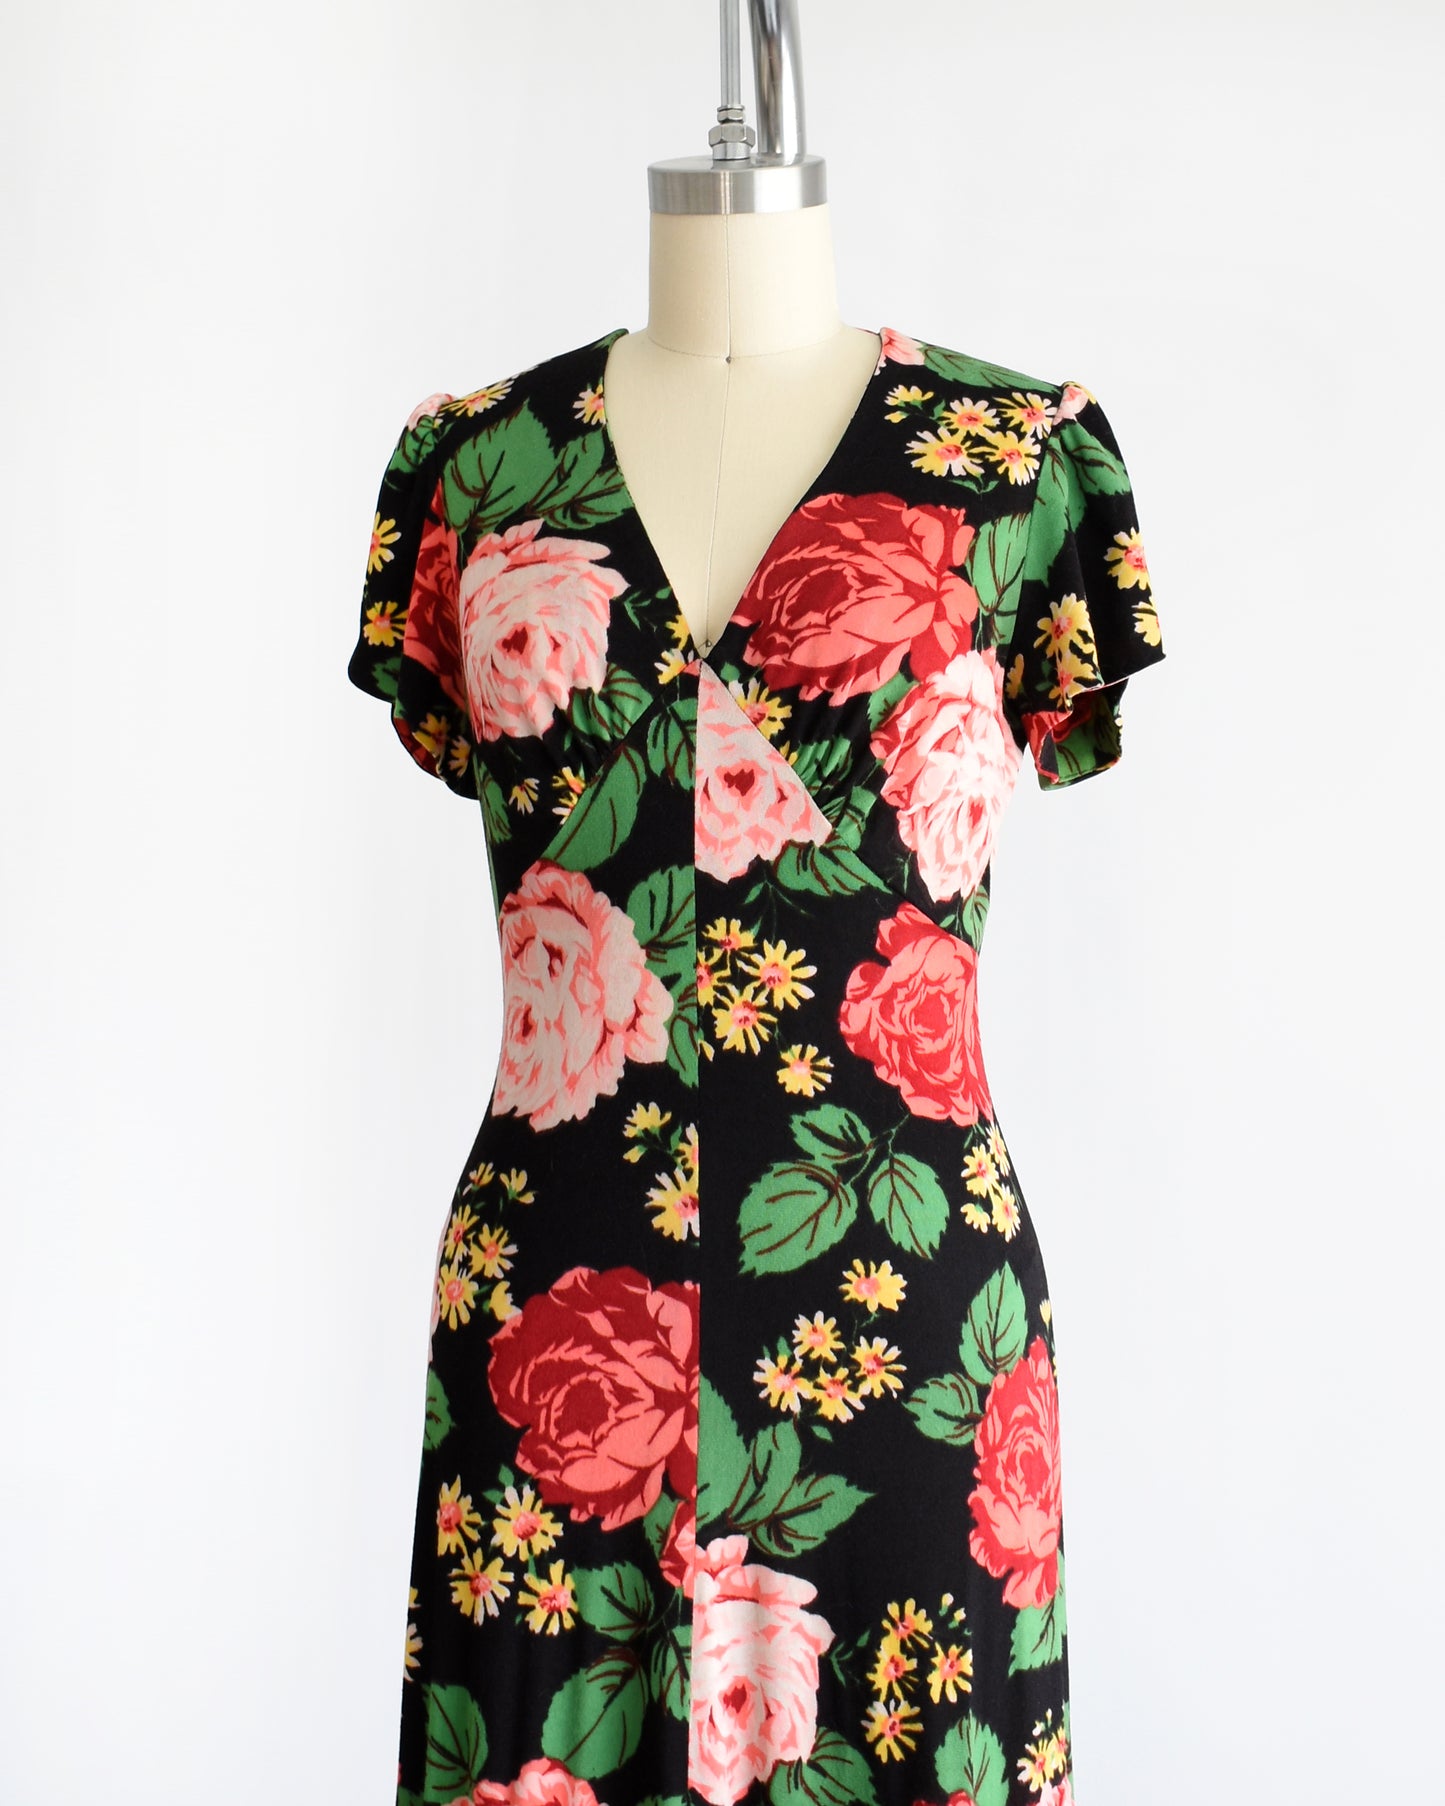 Side front view of a vintage 1970s black floral maxi dress features a vibrant floral pattern of red and pink roses, green leaves, and yellow and orange daisies. 